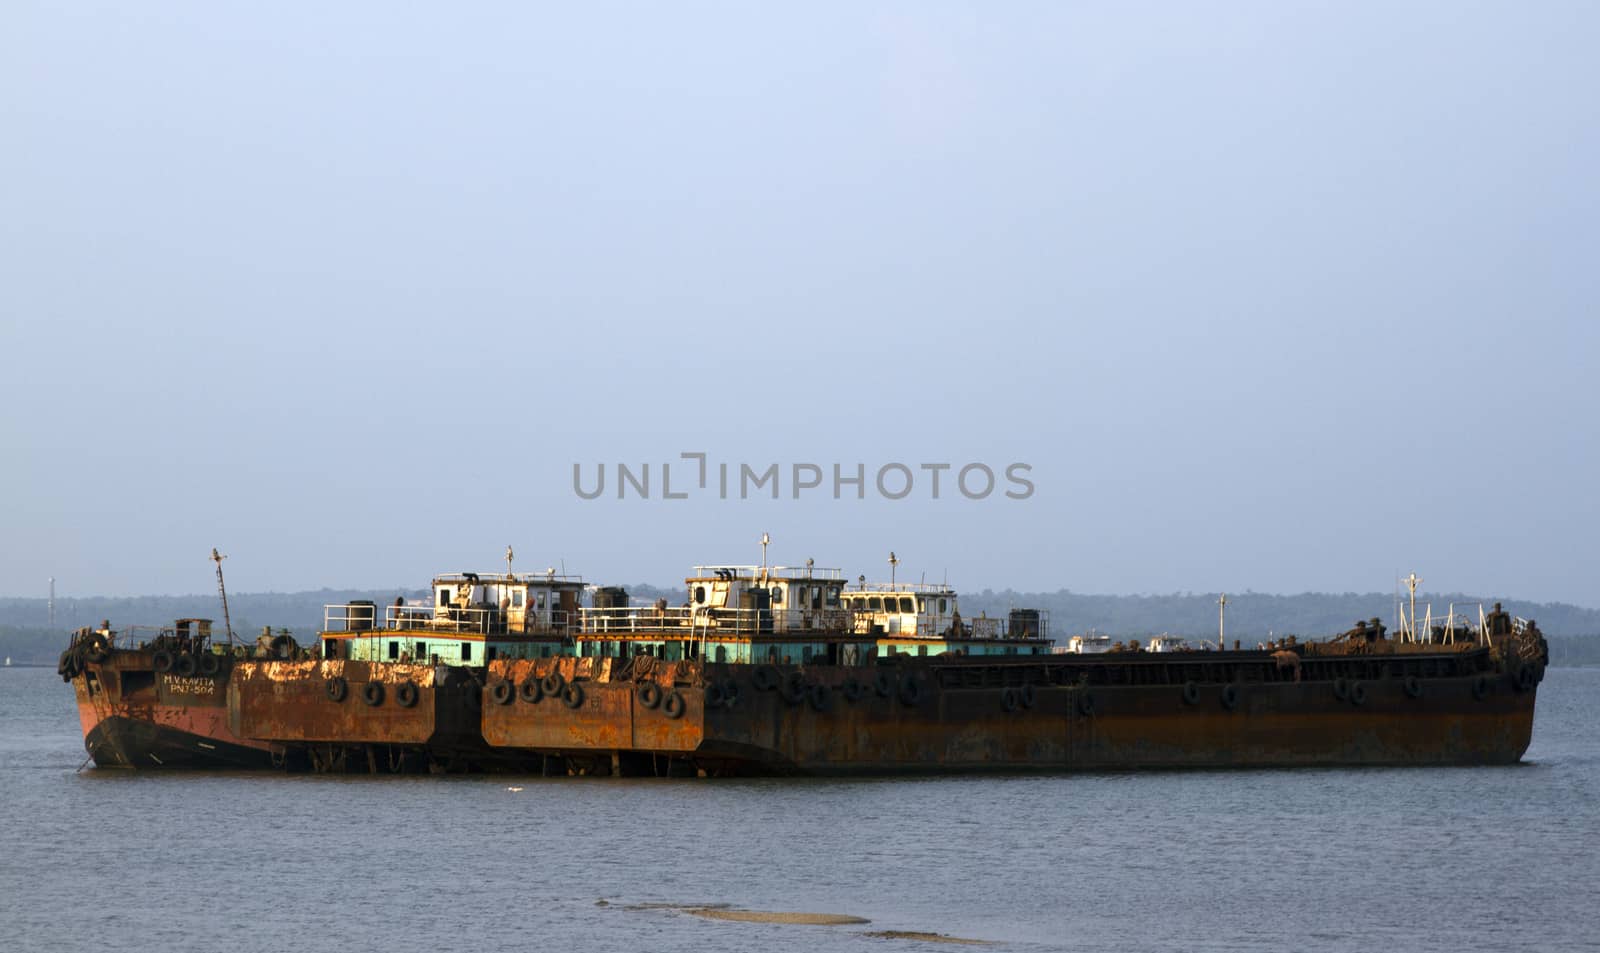 The parking of the old cargo ships stand. Cemetery of the old ships India, Goa by mcherevan